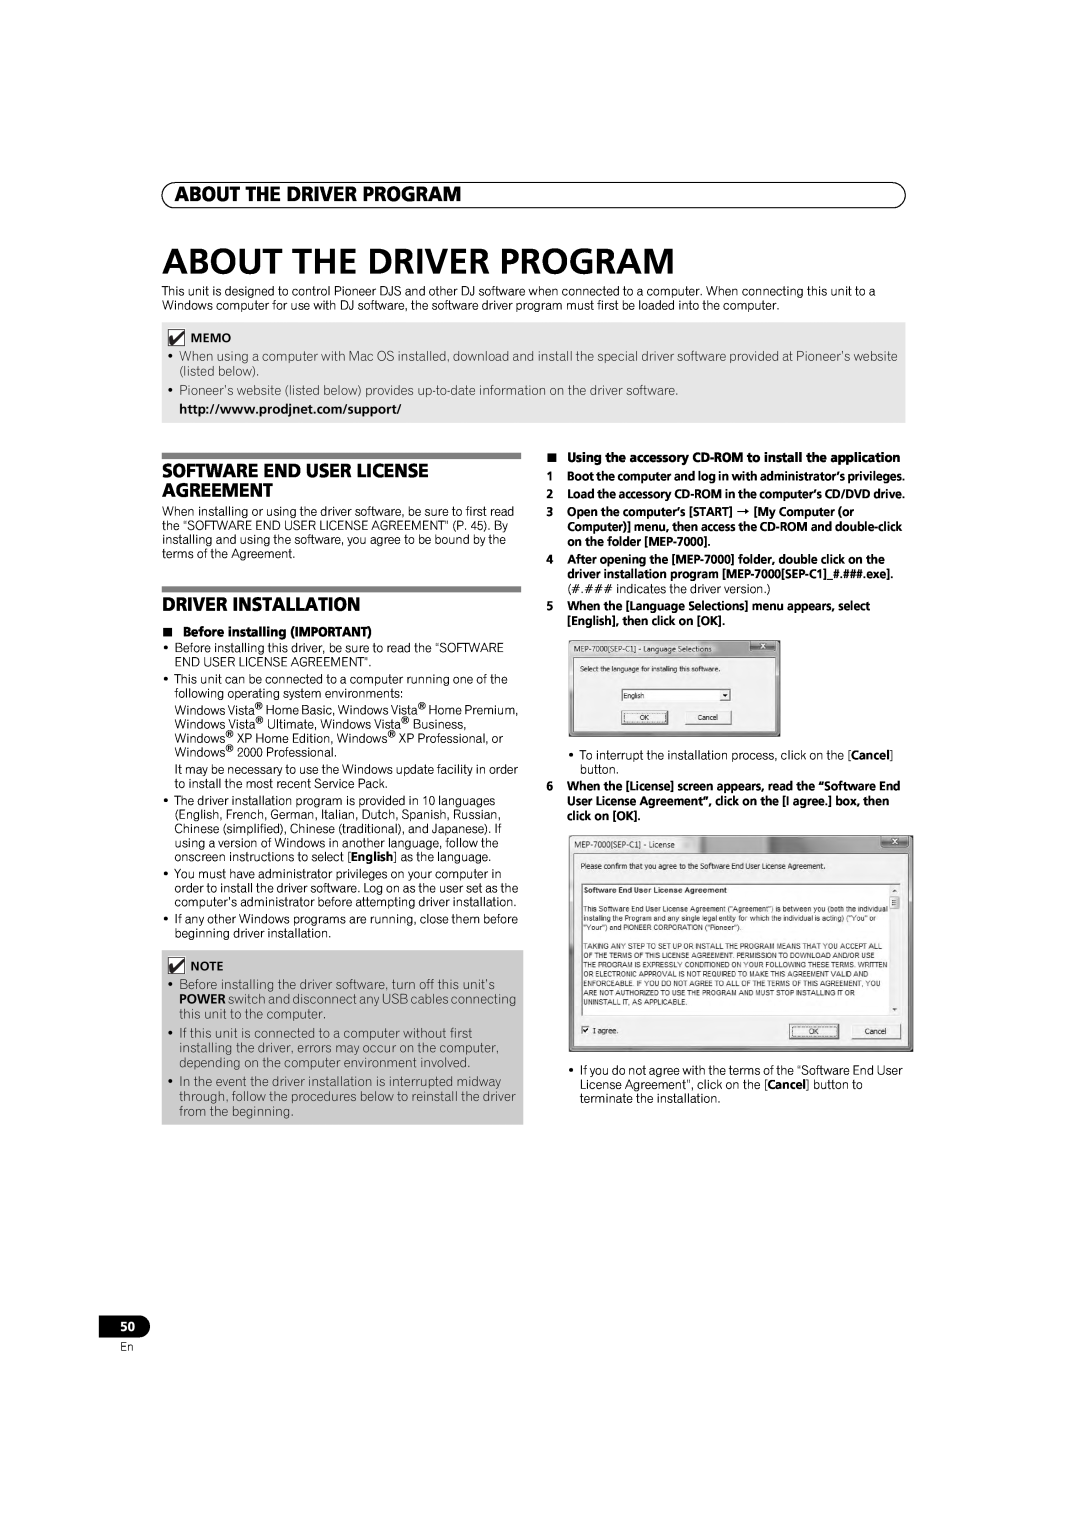 Pioneer MEP-7000 operating instructions About The Driver Program, Driver Installation, Software End User License Agreement 